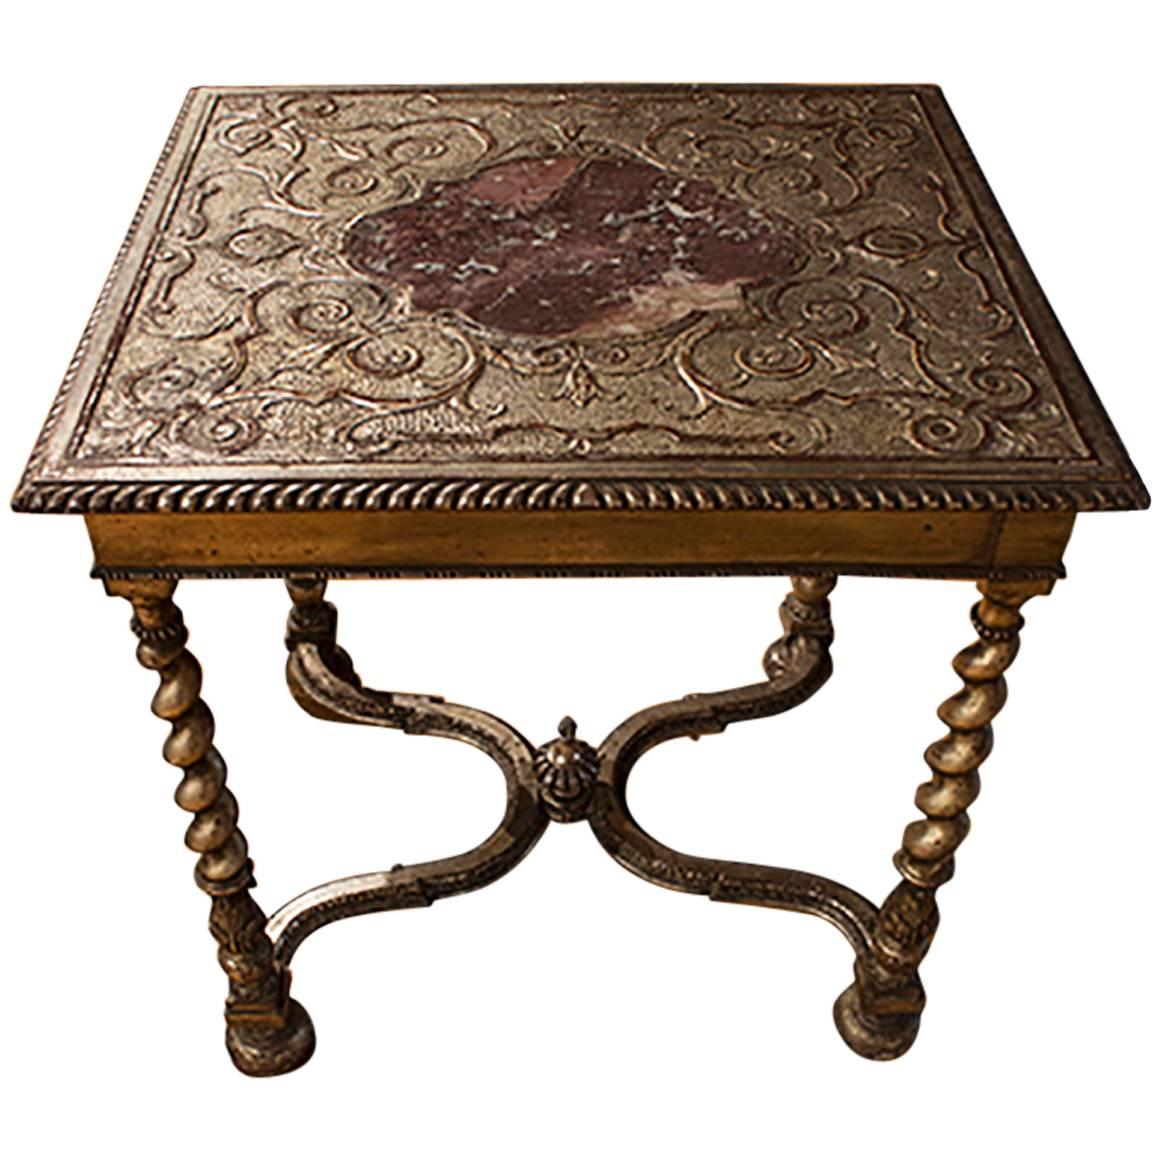 English Silver Gilt Table with Marble Insert